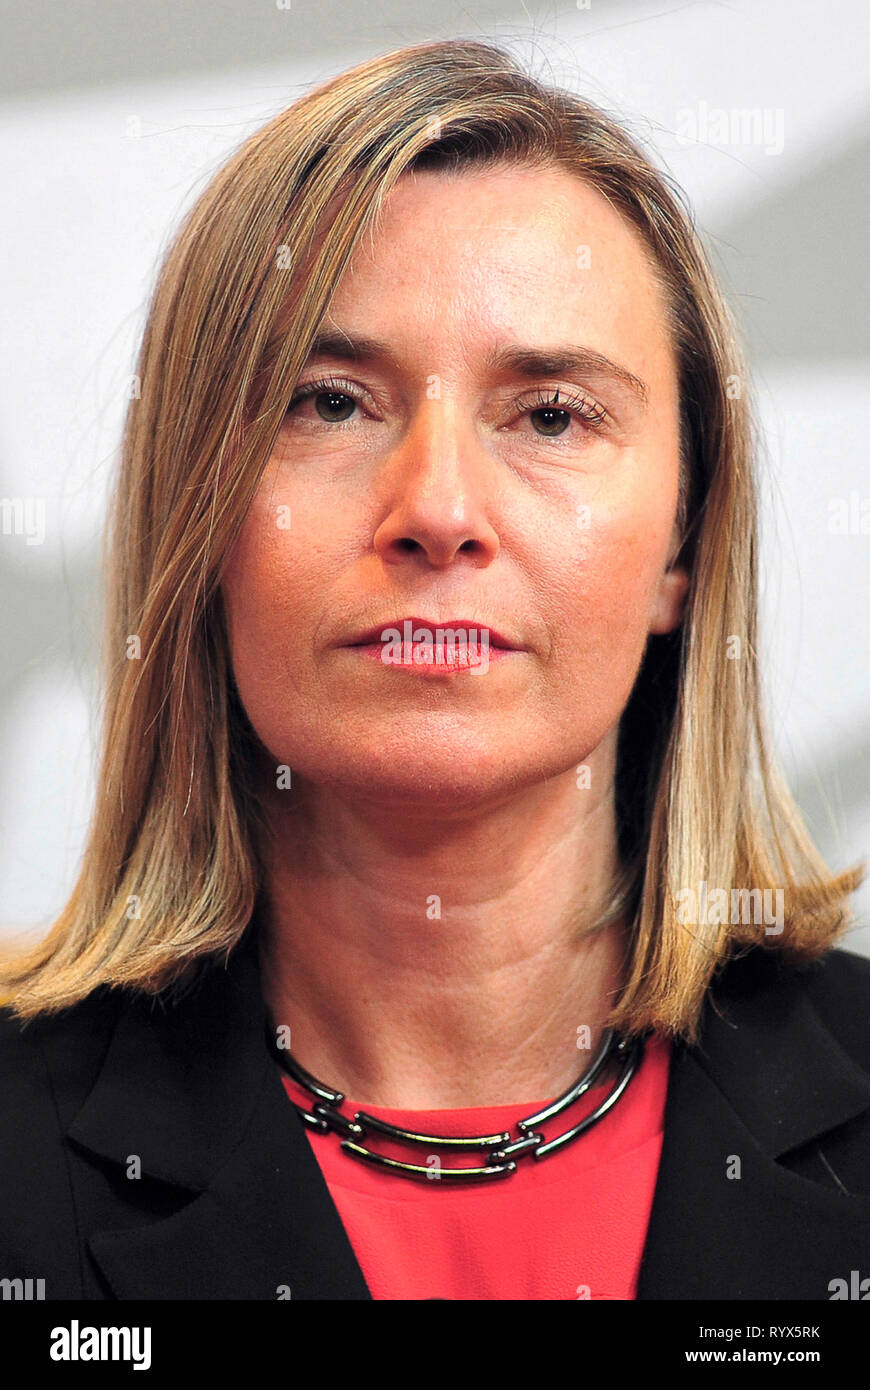 Federica Mogherini - *16.06.1973: Italian Politician and High Representative for Foreign Affairs and Security Policy of the European Union - Italy. Stock Photo